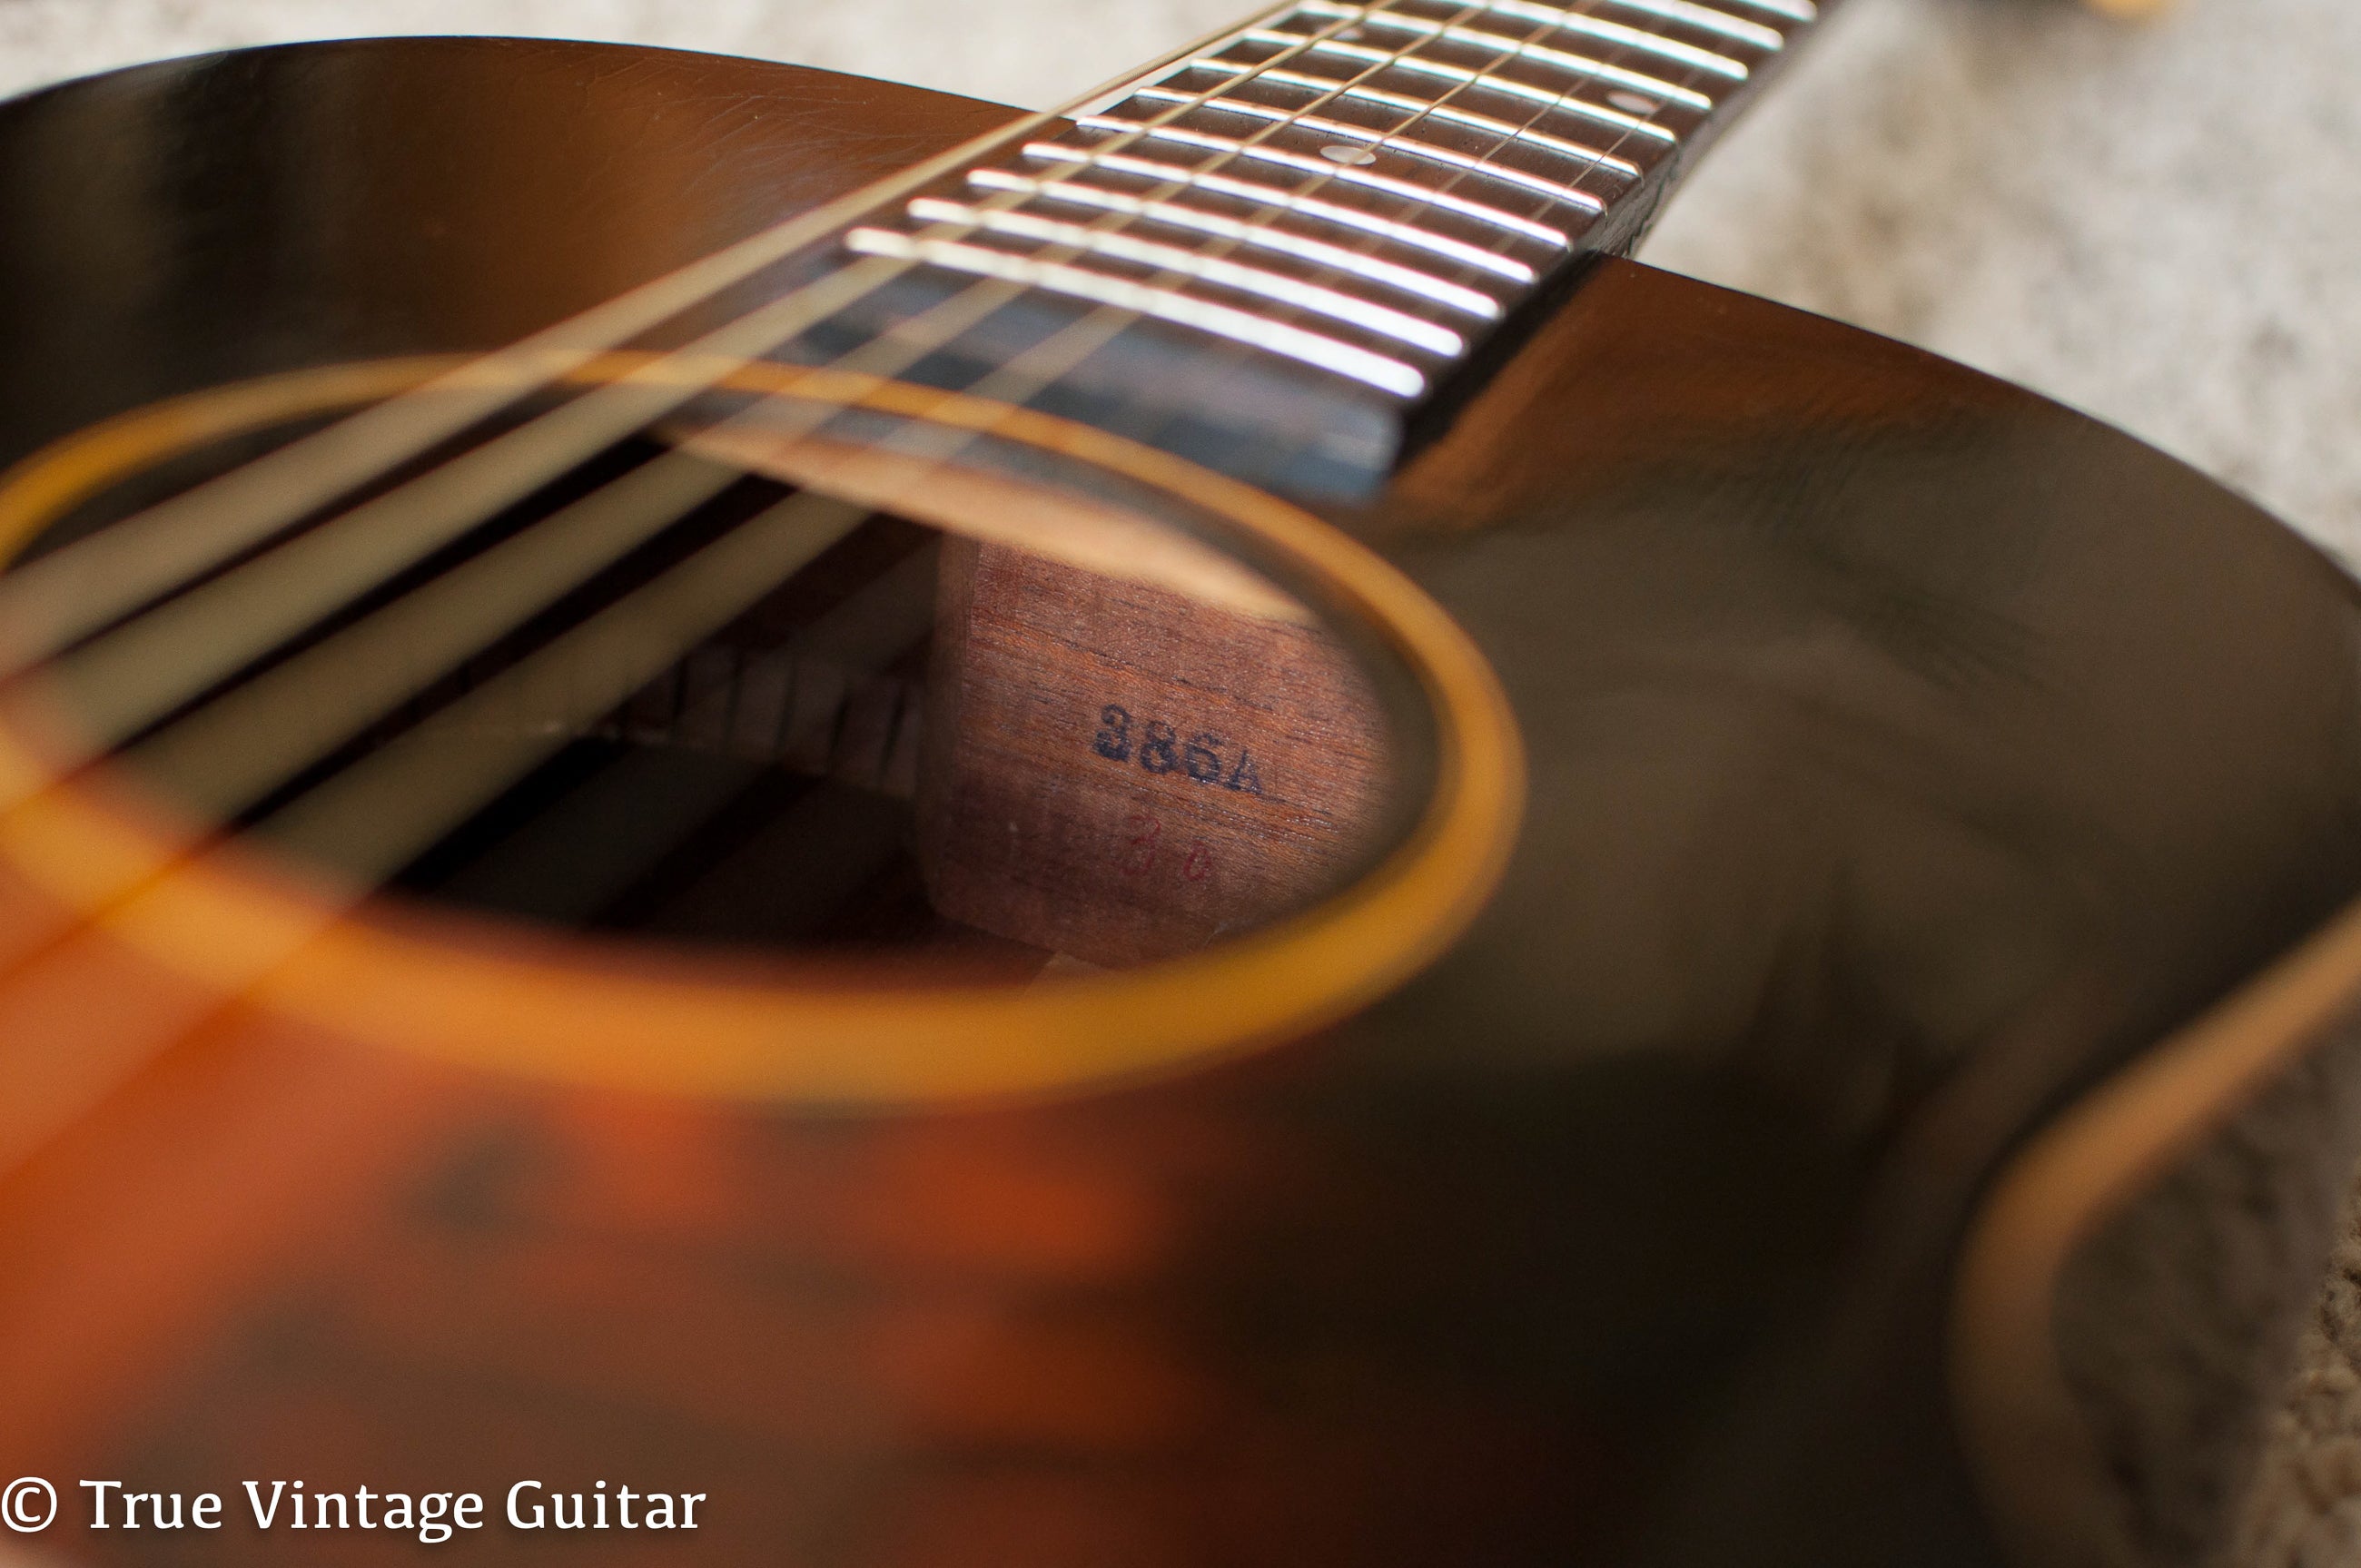 How to date vintage Gibson acoustic guitar